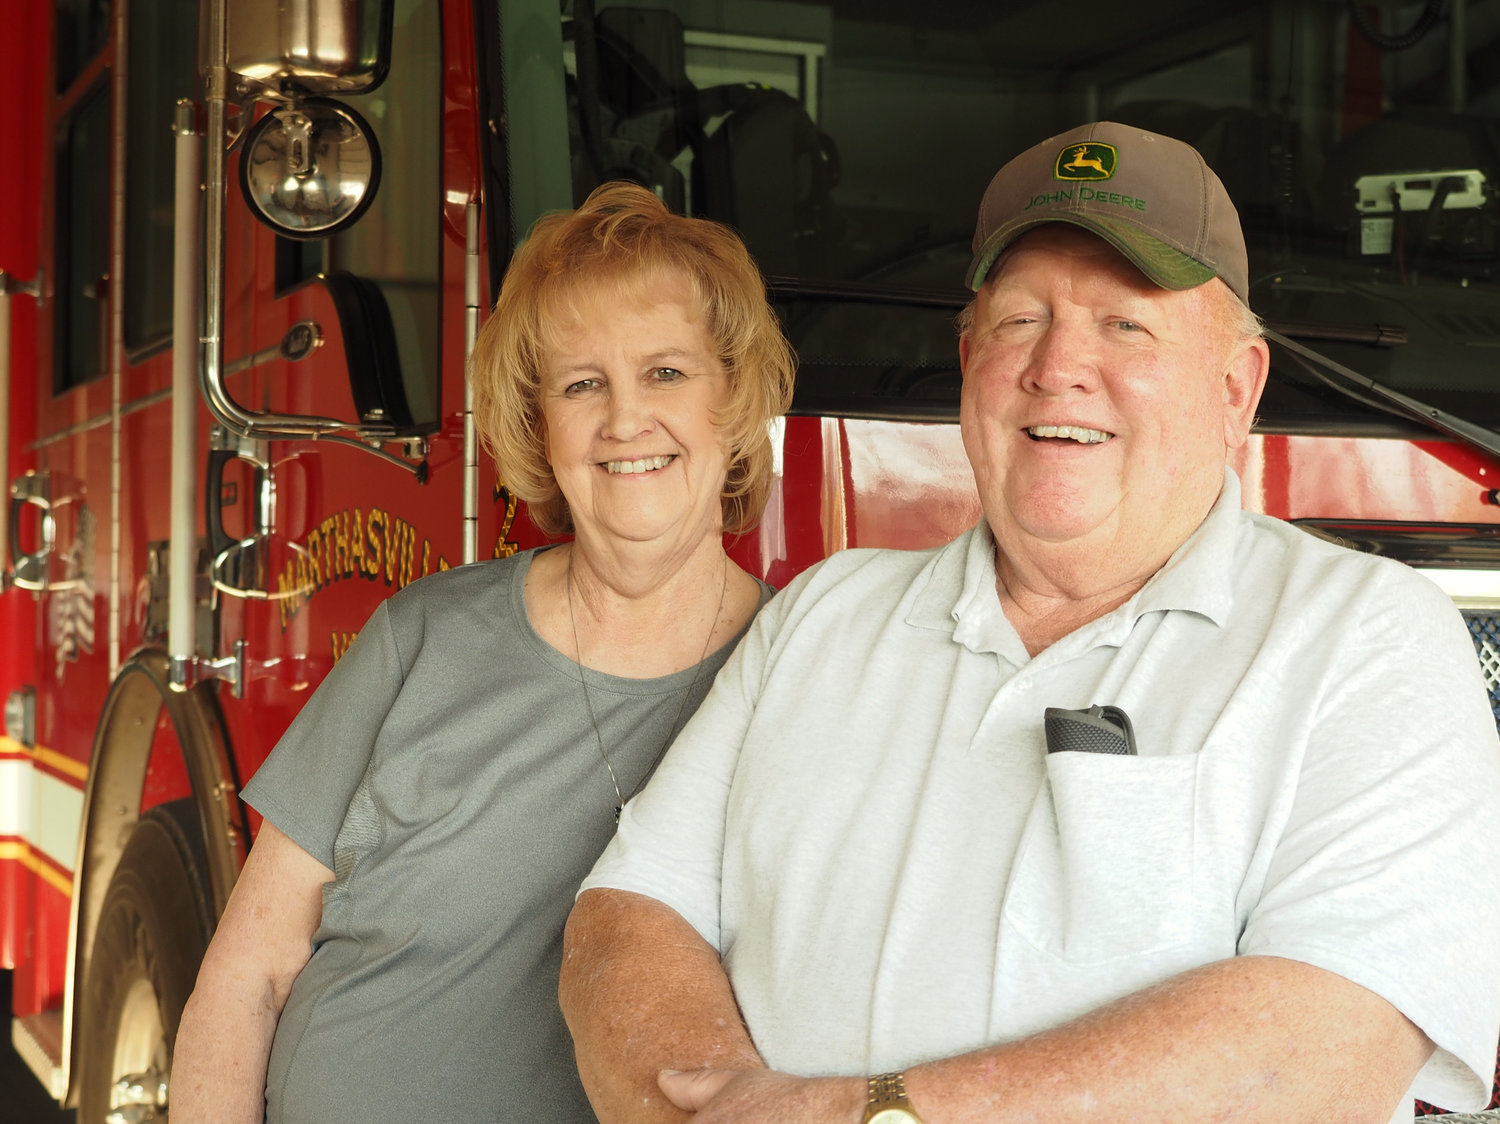 50 YEARS STRONG — Retired Fire Chief Jim Buescher and his wife Cindy are a unique couple, both serving the public in their roles as first responders. Jim Buescher recently celebrated 50 years with the Marthasville Fire Protection District (MFPD). He was honored by firefighters past and present during a celebration held Wednesday, Nov. 9 at Marthasville’s Station 1. Buescher continues to respond to calls with the MFPD and serves on the district Board of Directors.